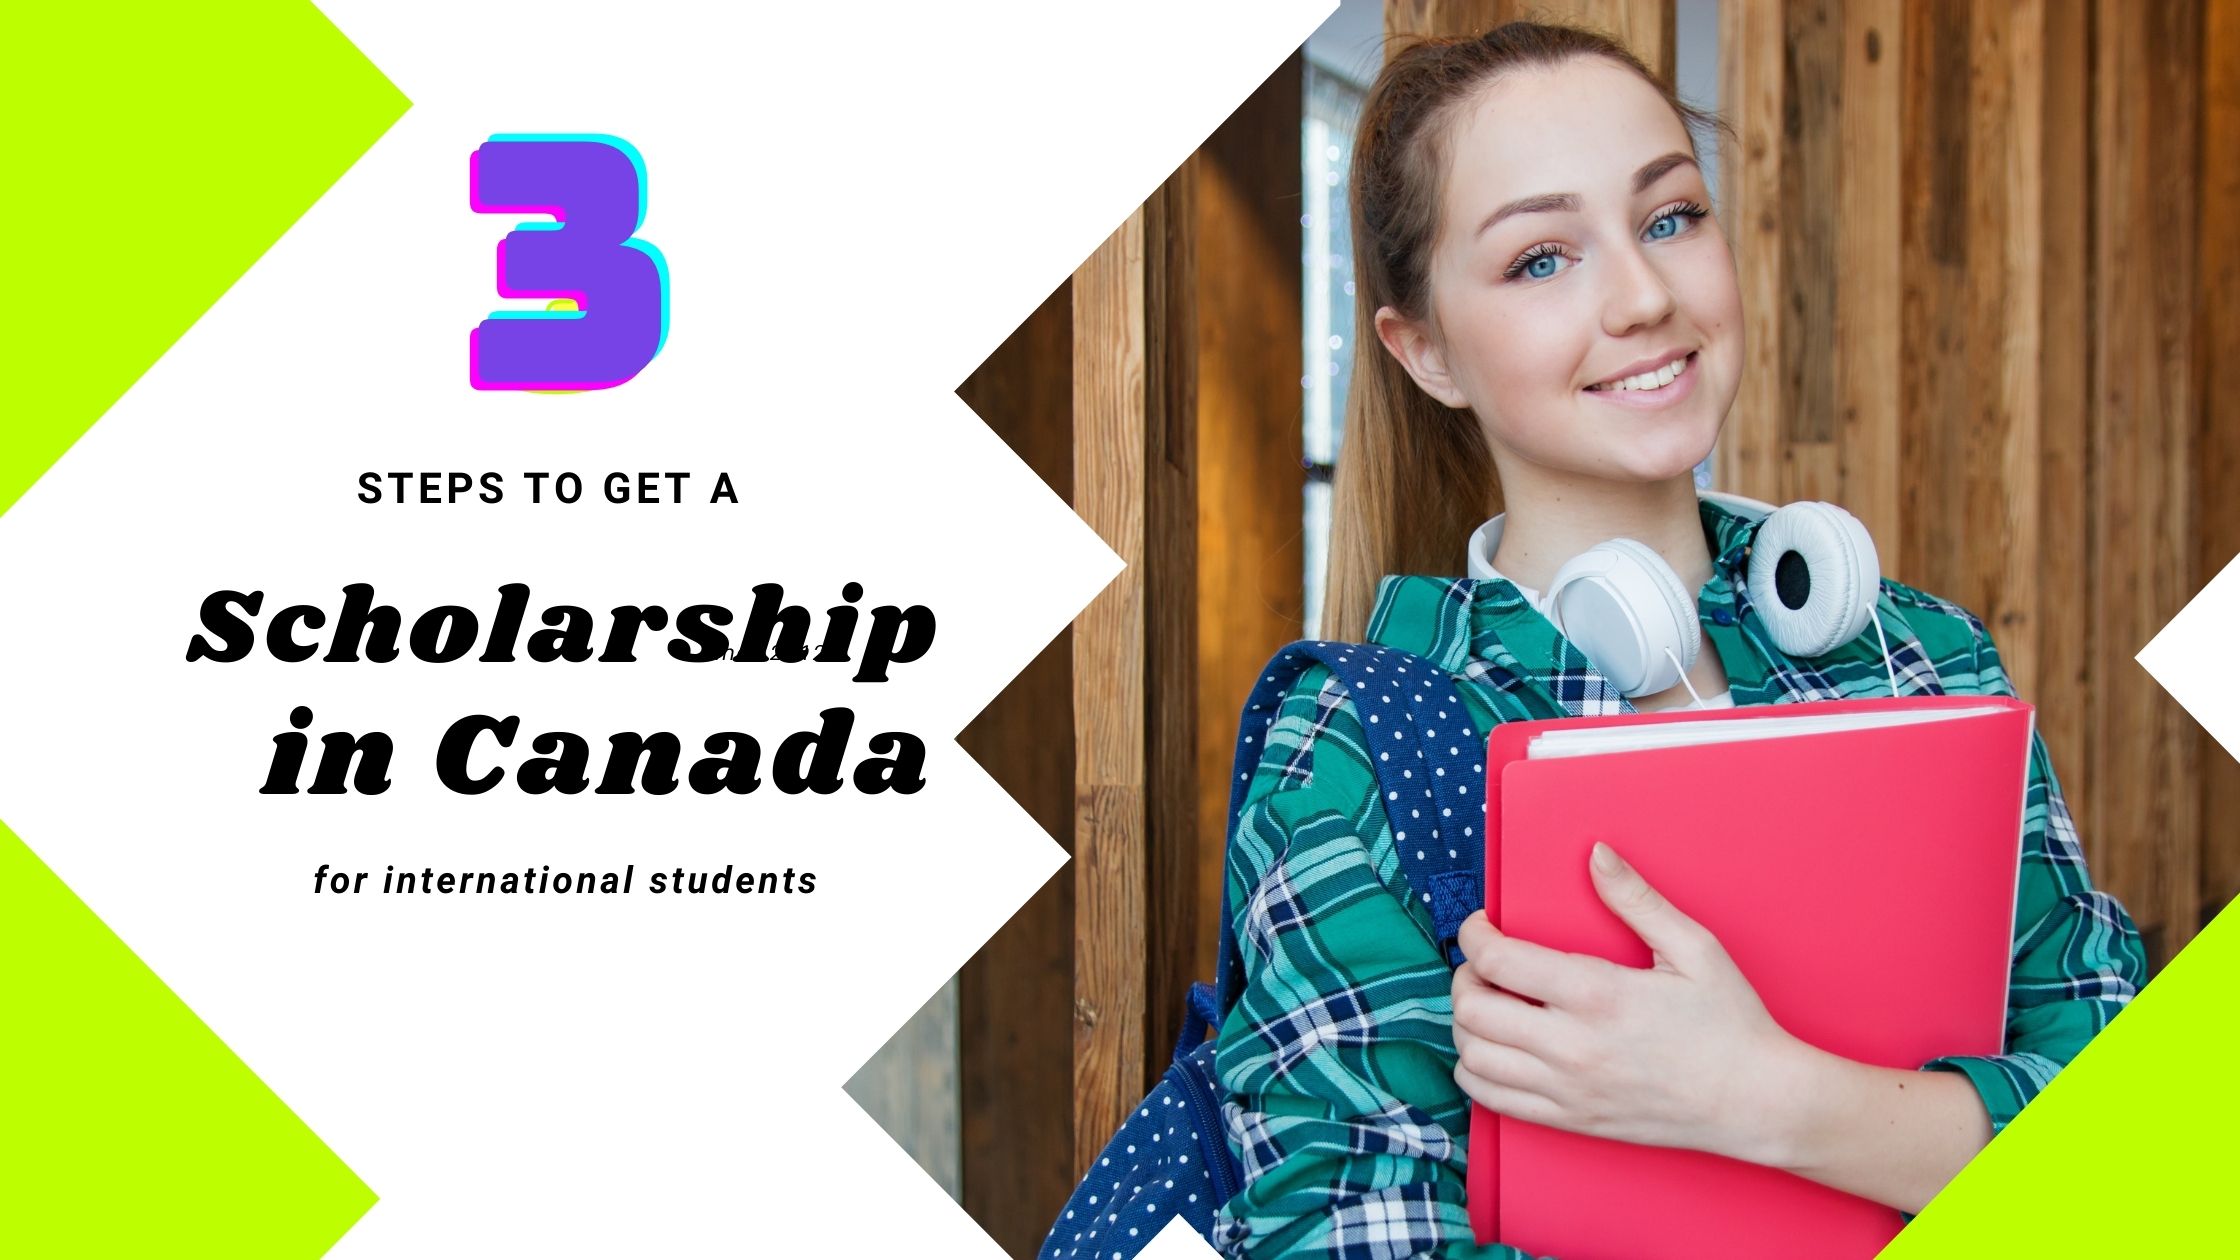 3 Steps to get a scholarship in Canada for International Students